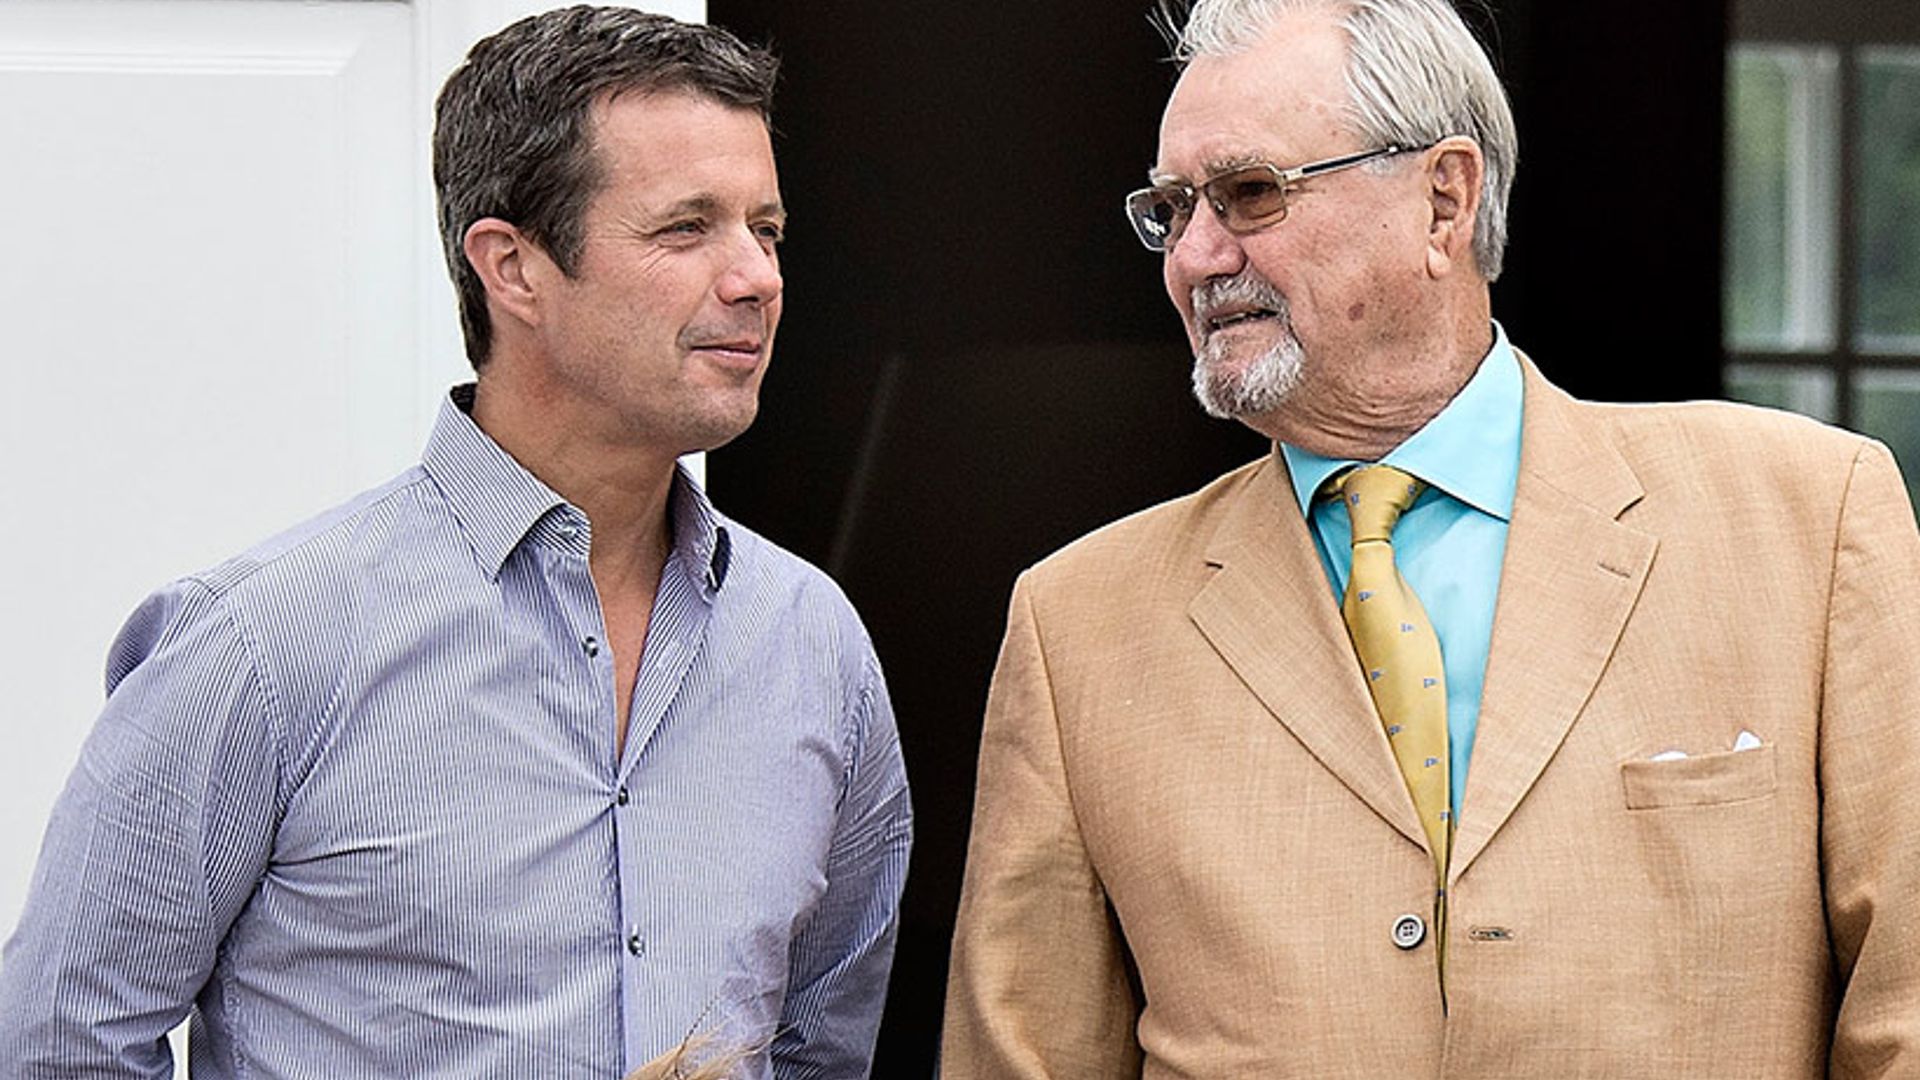 Prince Frederik visits his father Prince Henrik in hospital after condition worsens